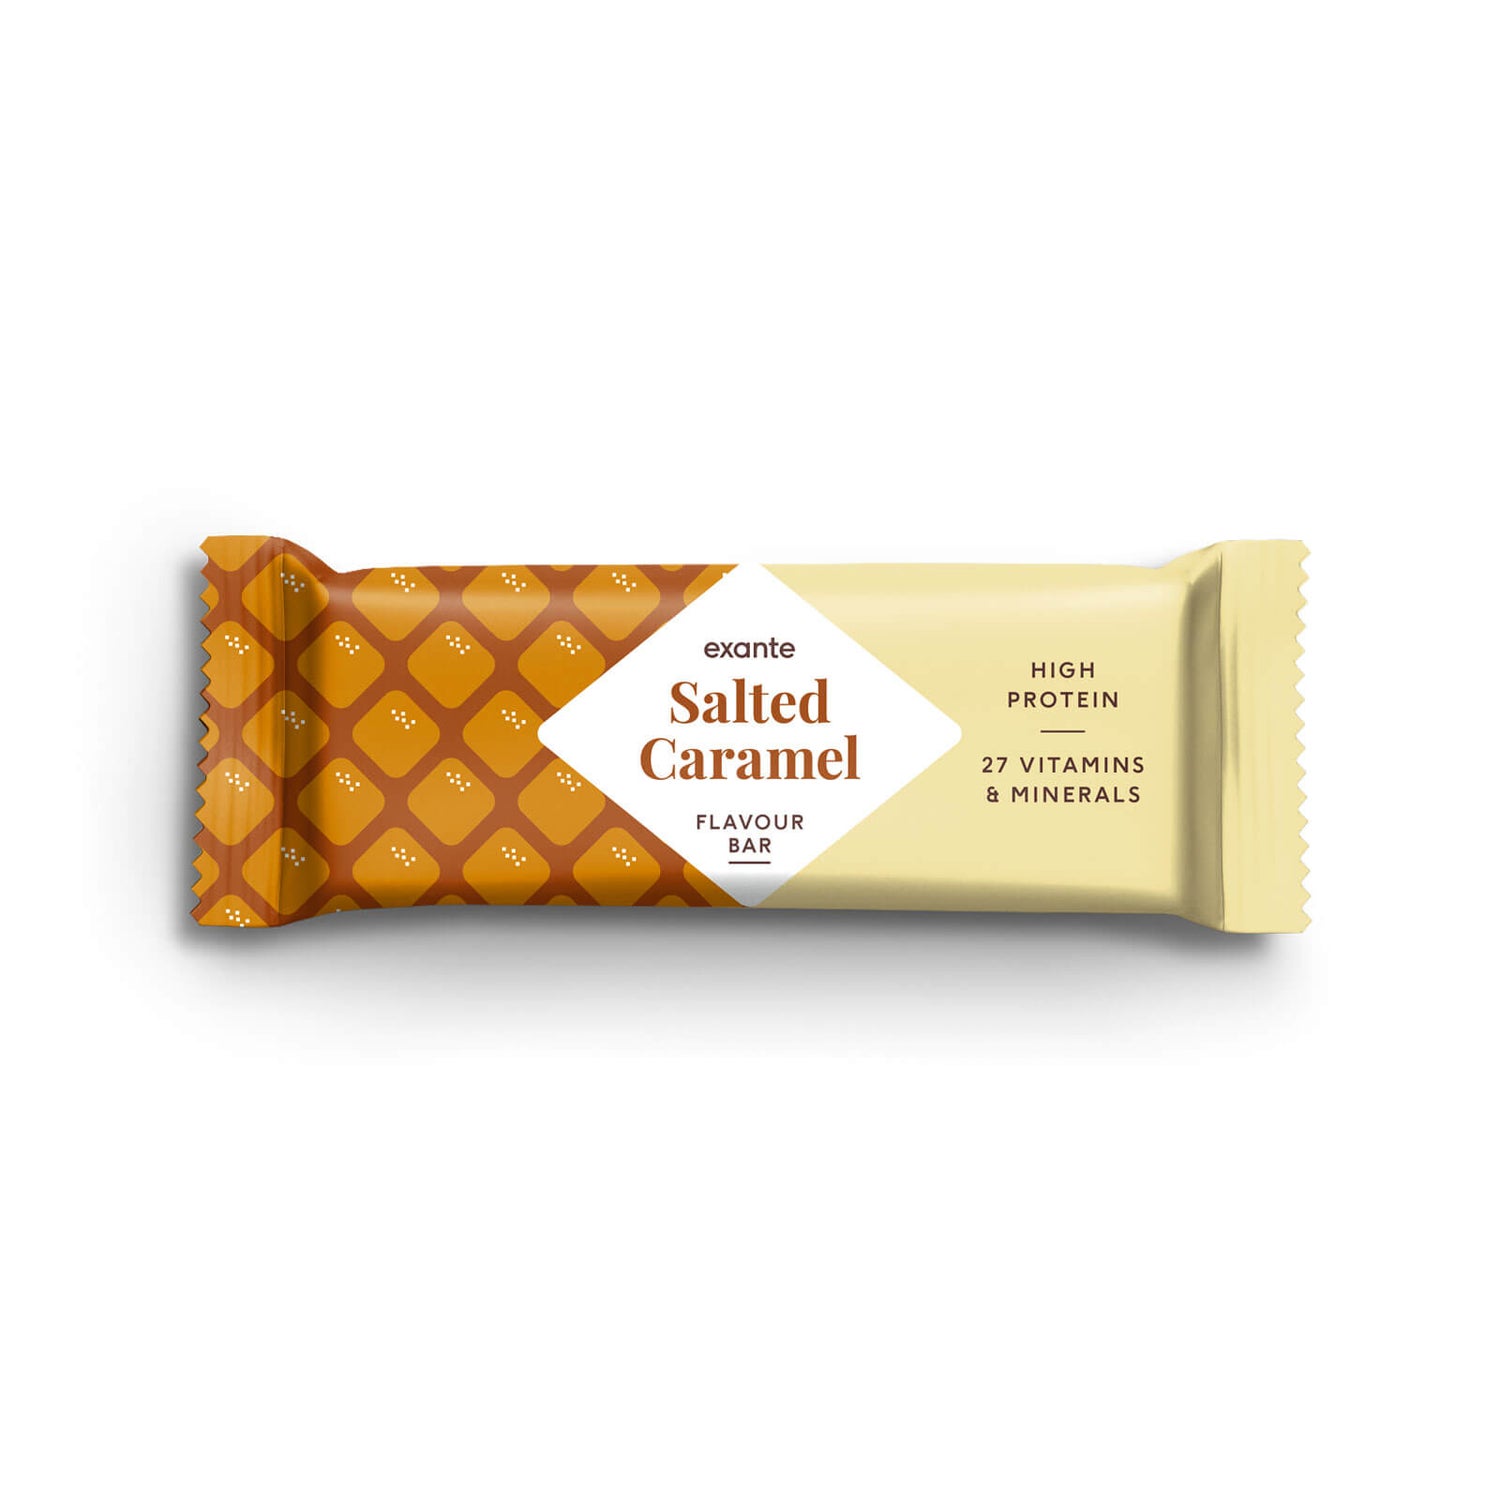 Salted Caramel Flavour Meal Replacement Bar